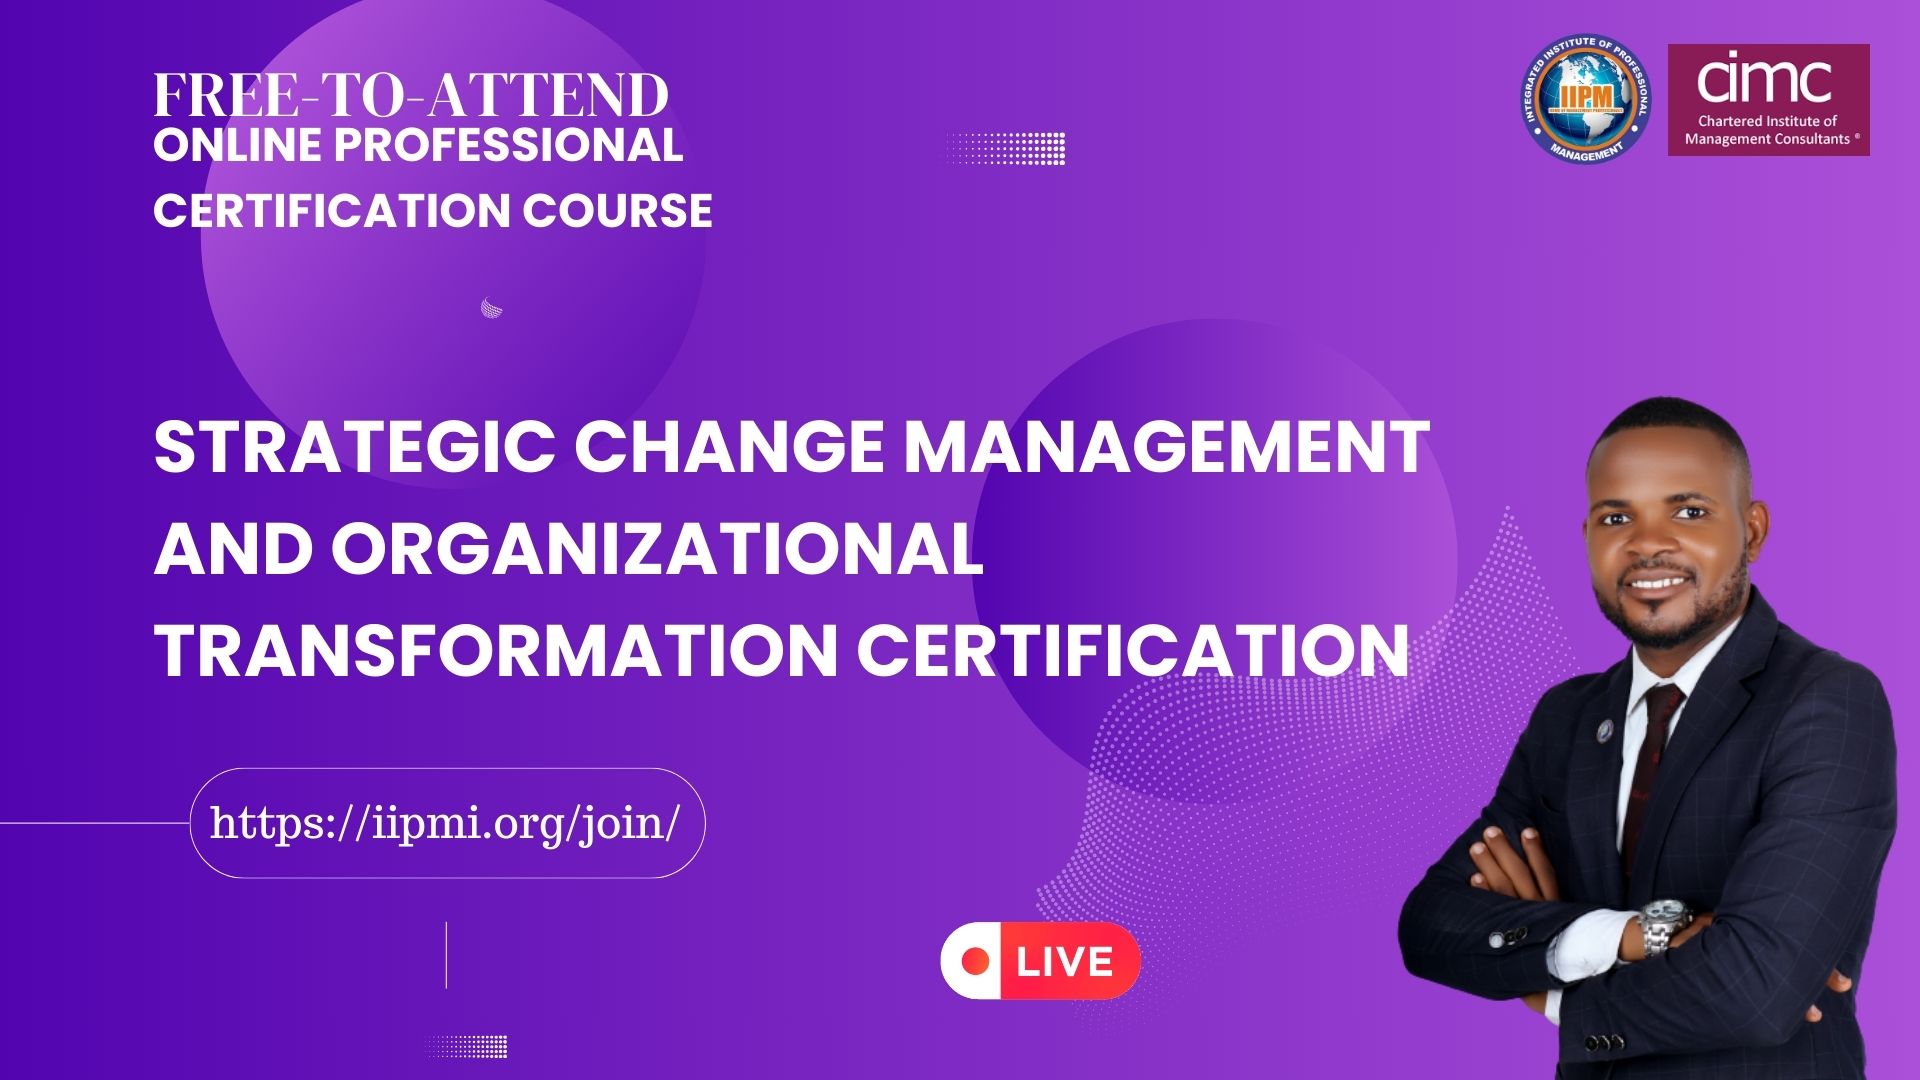 Professional Certificate Course in Strategic Change Management and Organizational Transformation